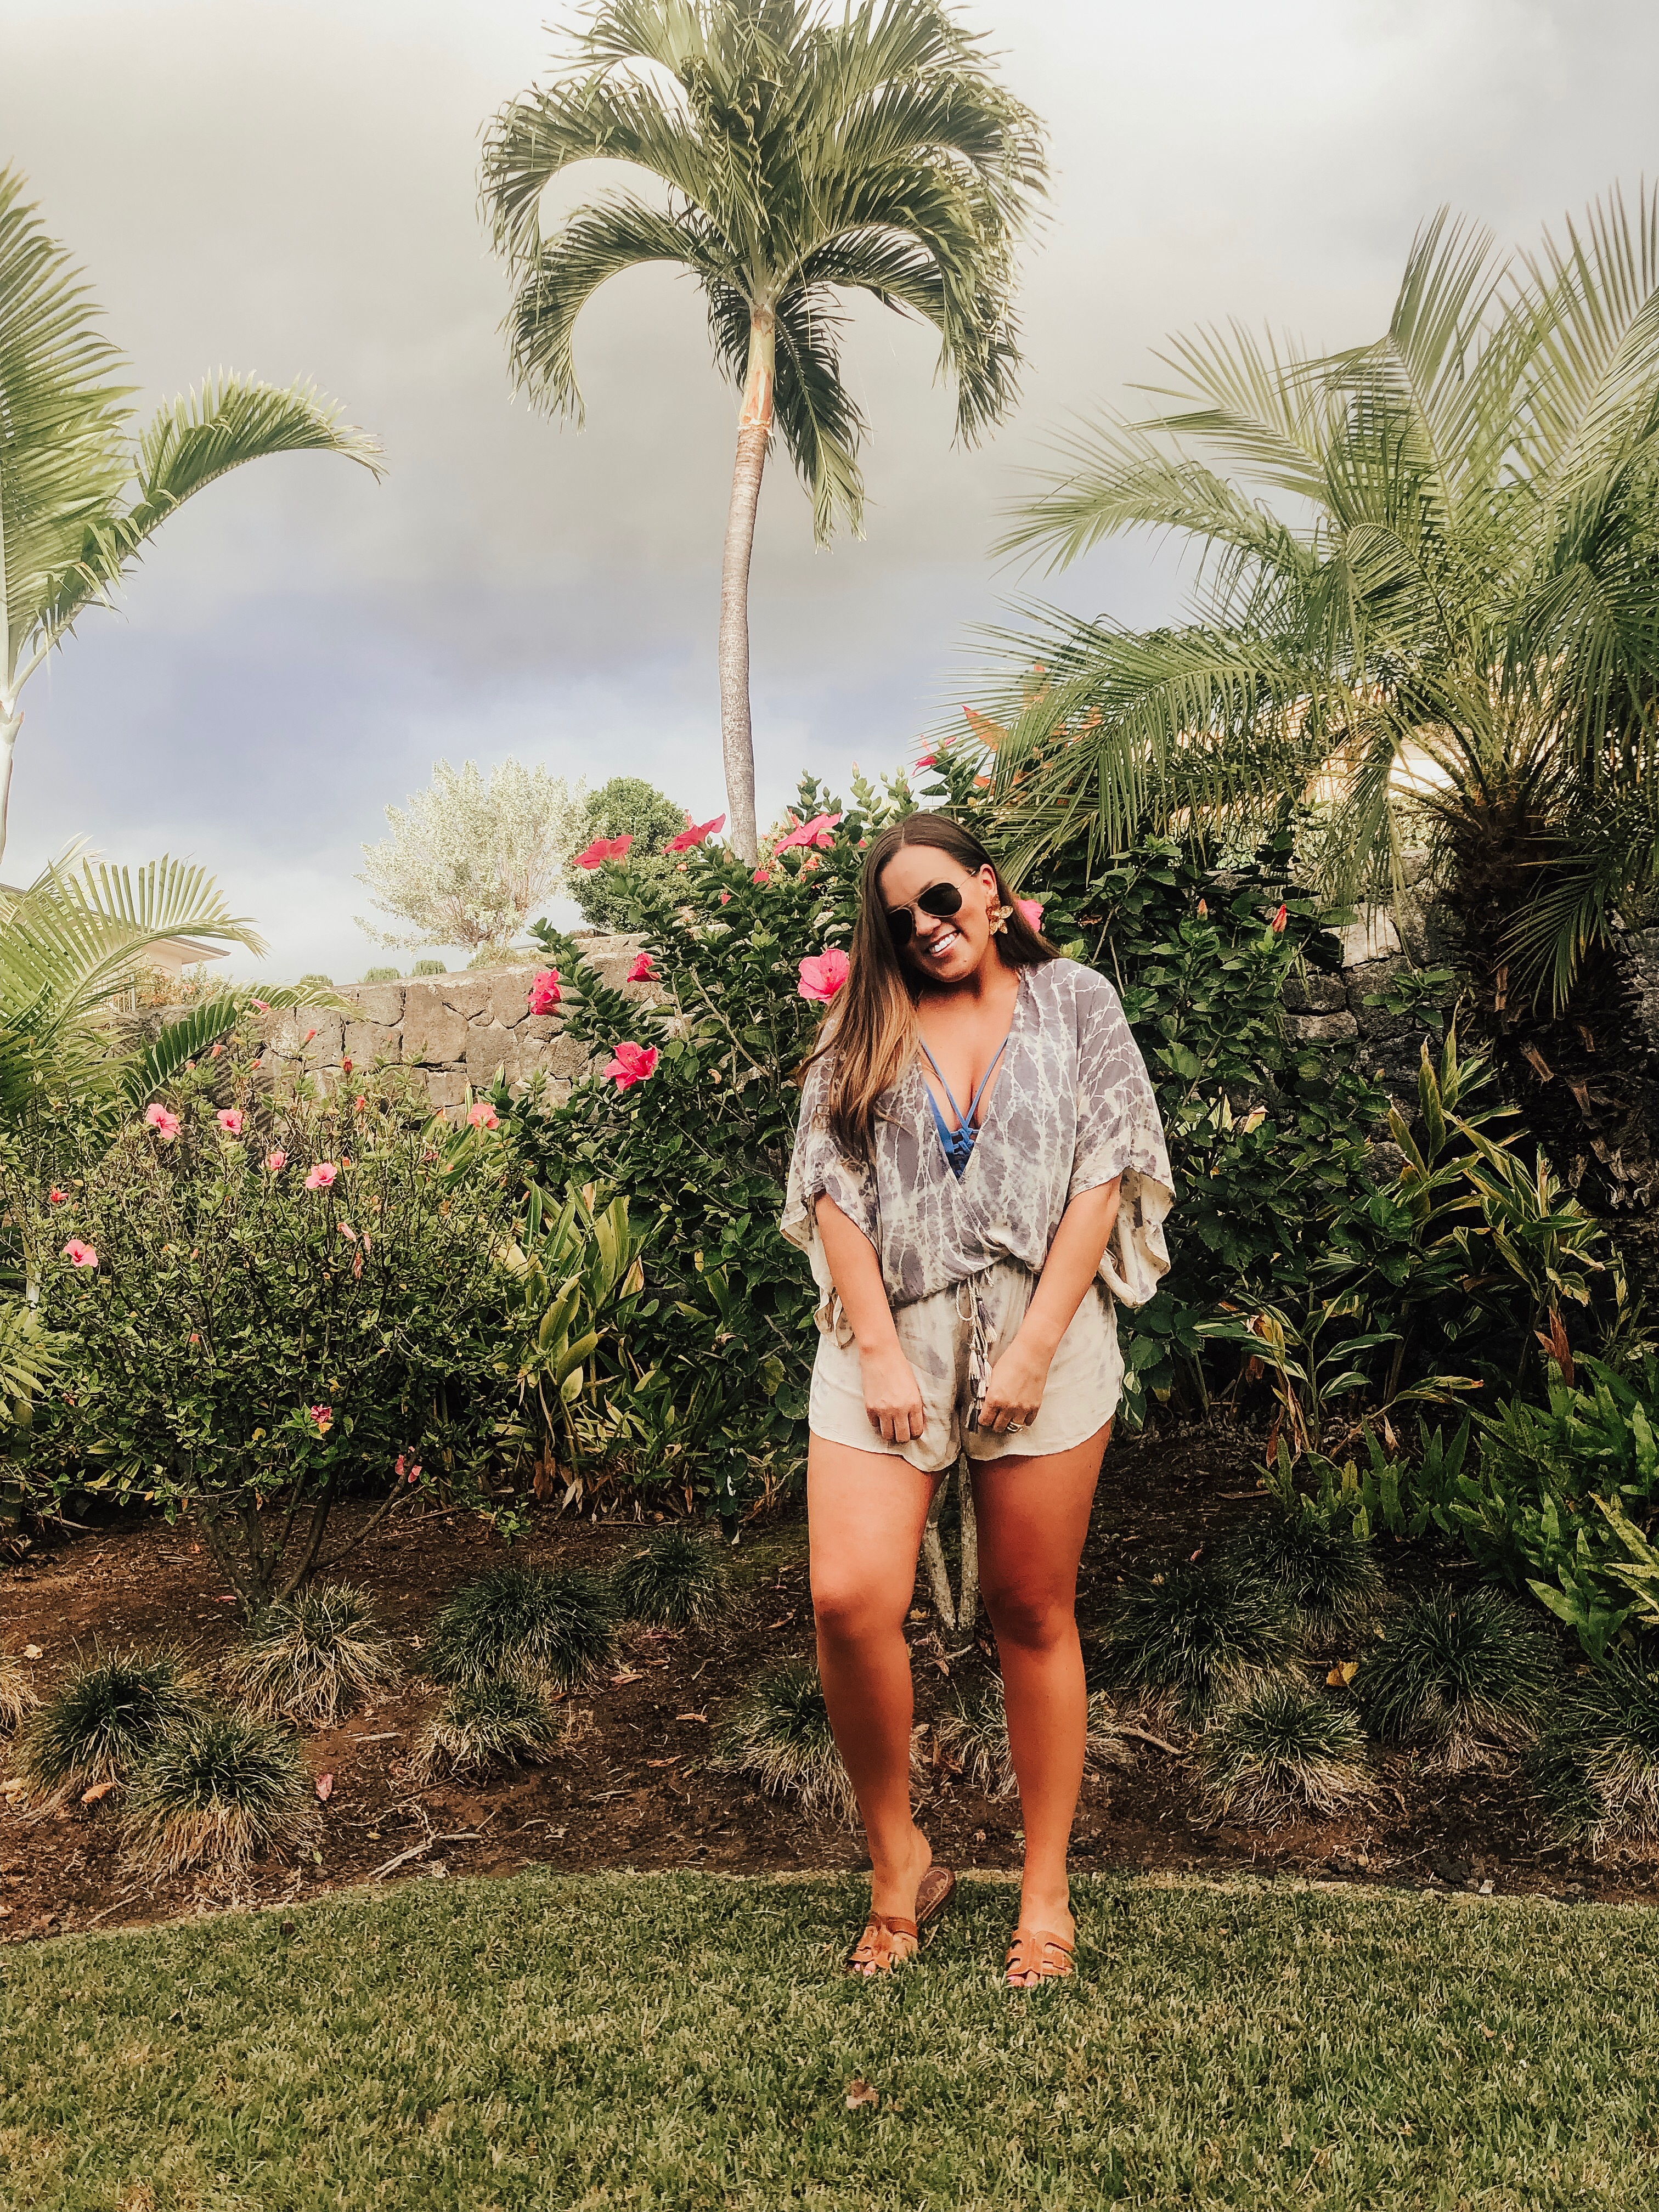 San Francisco blogger Ashley Zeal from Two Peas in a Prada shares her vacation essentials under $100. Shop all her affordable top picks perfect for a tropical trip. 